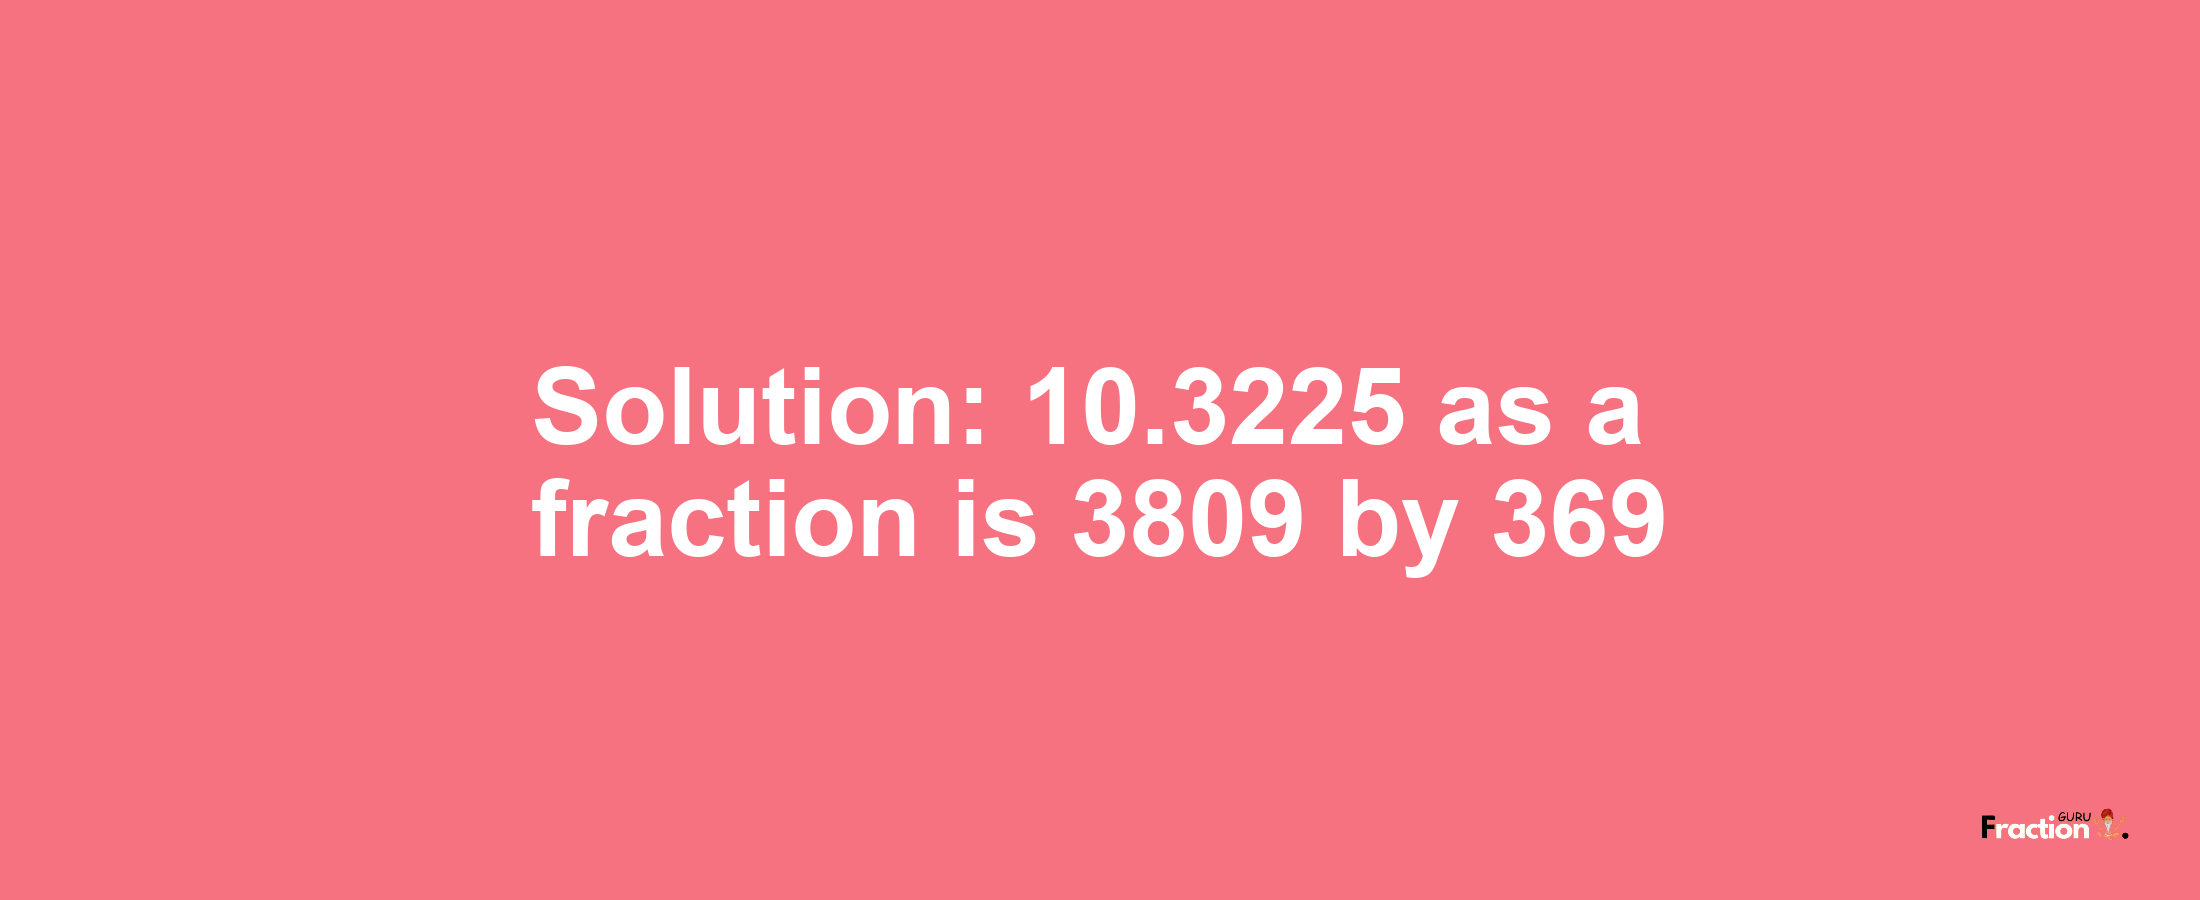 Solution:10.3225 as a fraction is 3809/369